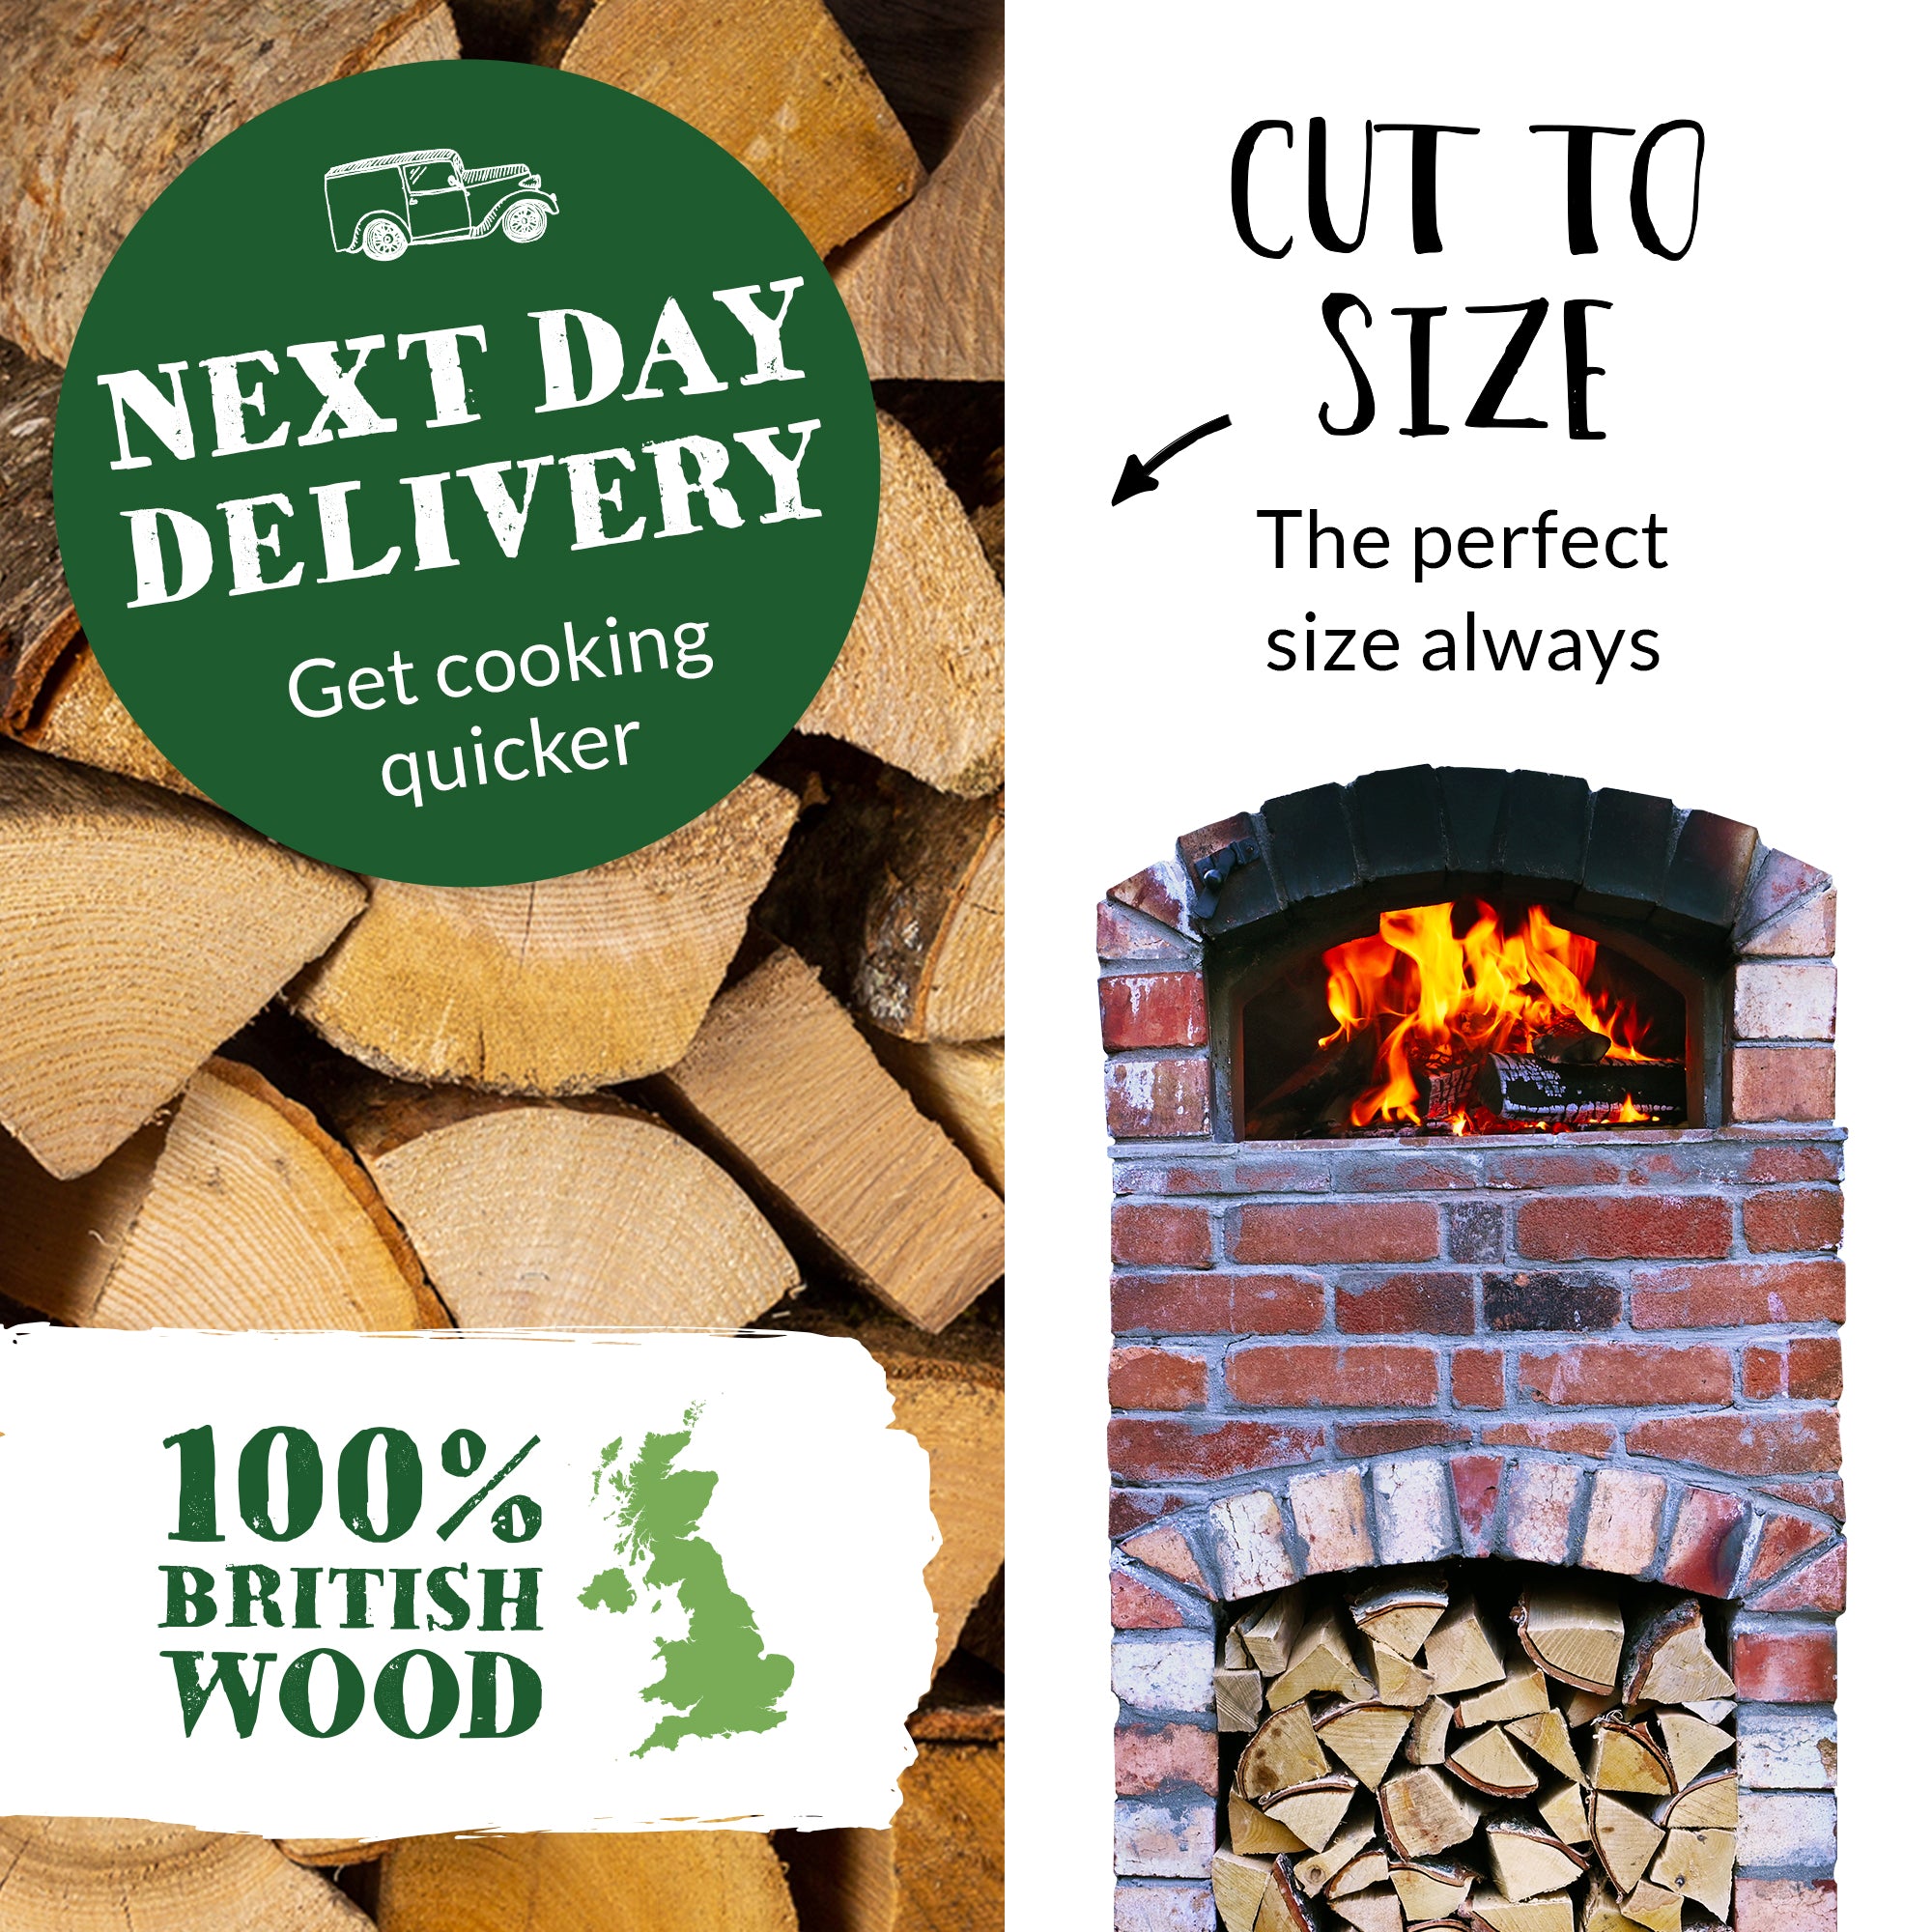 Pizza Oven Starter Kit. Big Pizza Oven Hardwood Logs, Kindling, Natural Firelighters and Matches